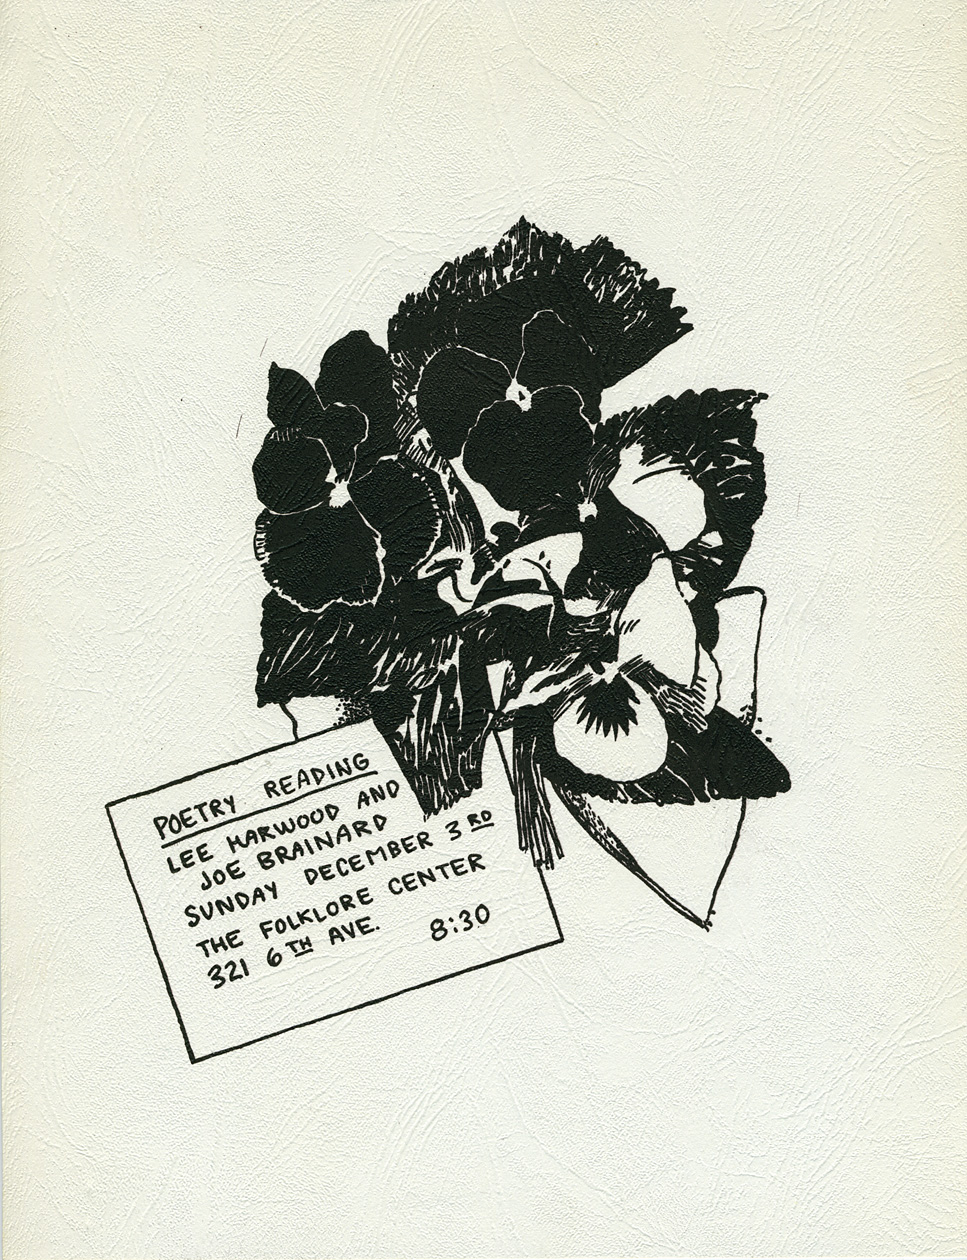 Program for Lee Harwood and Joe Brainard’s poetry reading at the Folklore Center, New York City, December 3, 1967. Artwork by Joe Brainard. 8 ½ x 11 inch stapled sheets. 